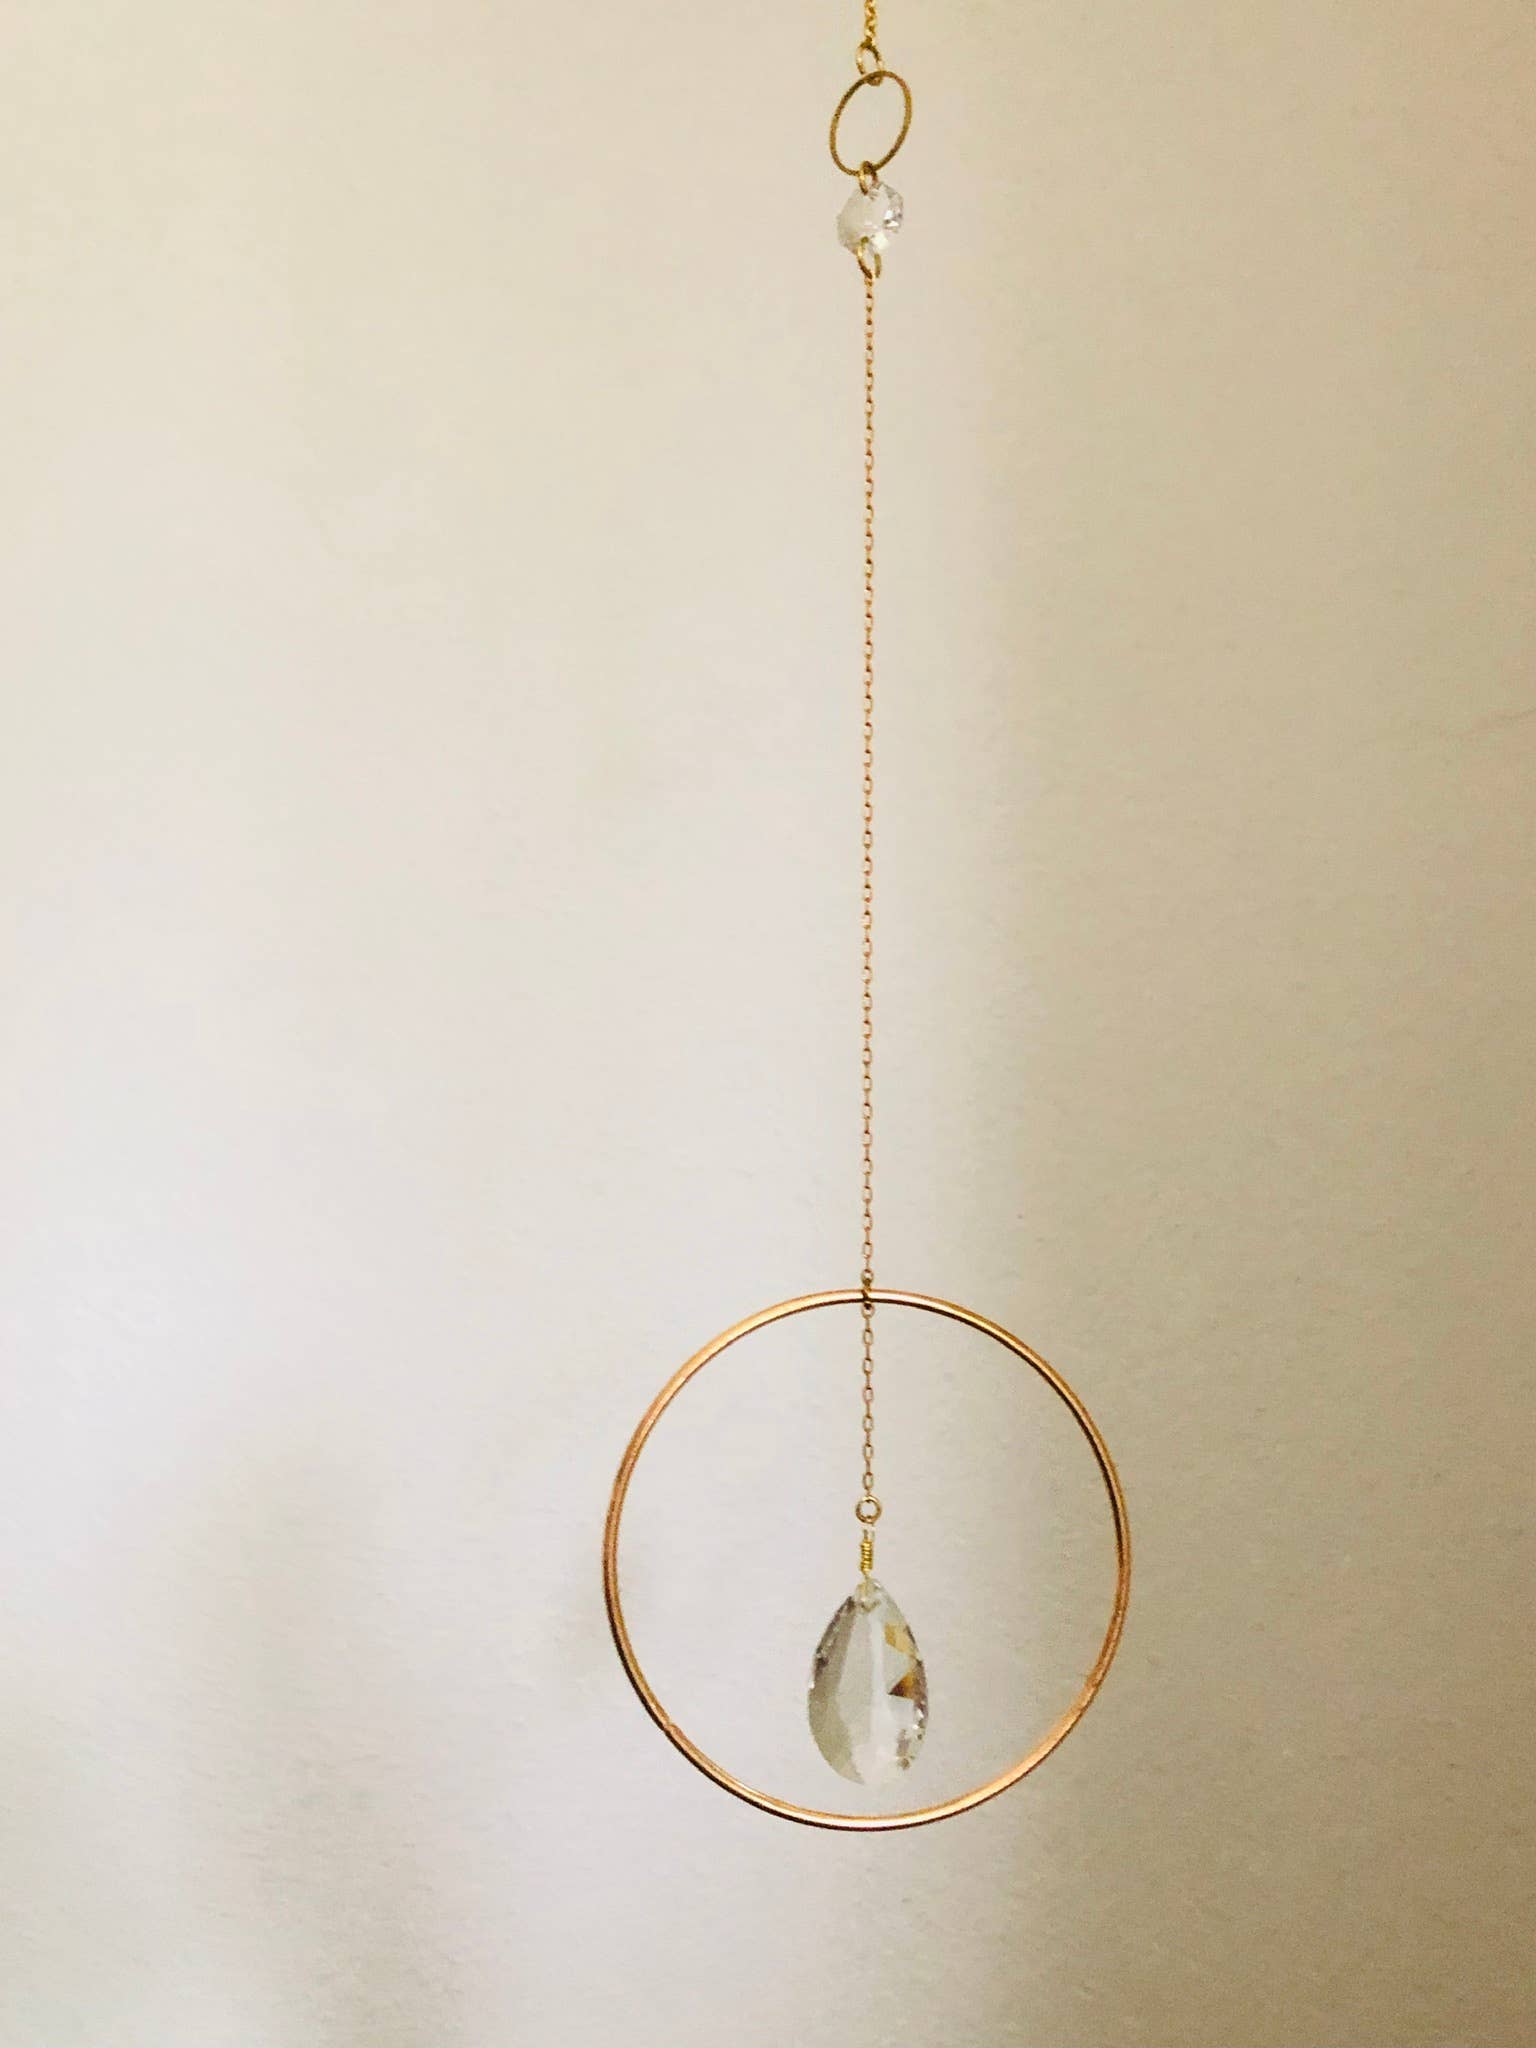 Artisan-crafted light catcher made from brass tubing and 2 vintage faceted crystals. Ready to hang in any space in your home - on a wall to brighten or in a window to catch the light.